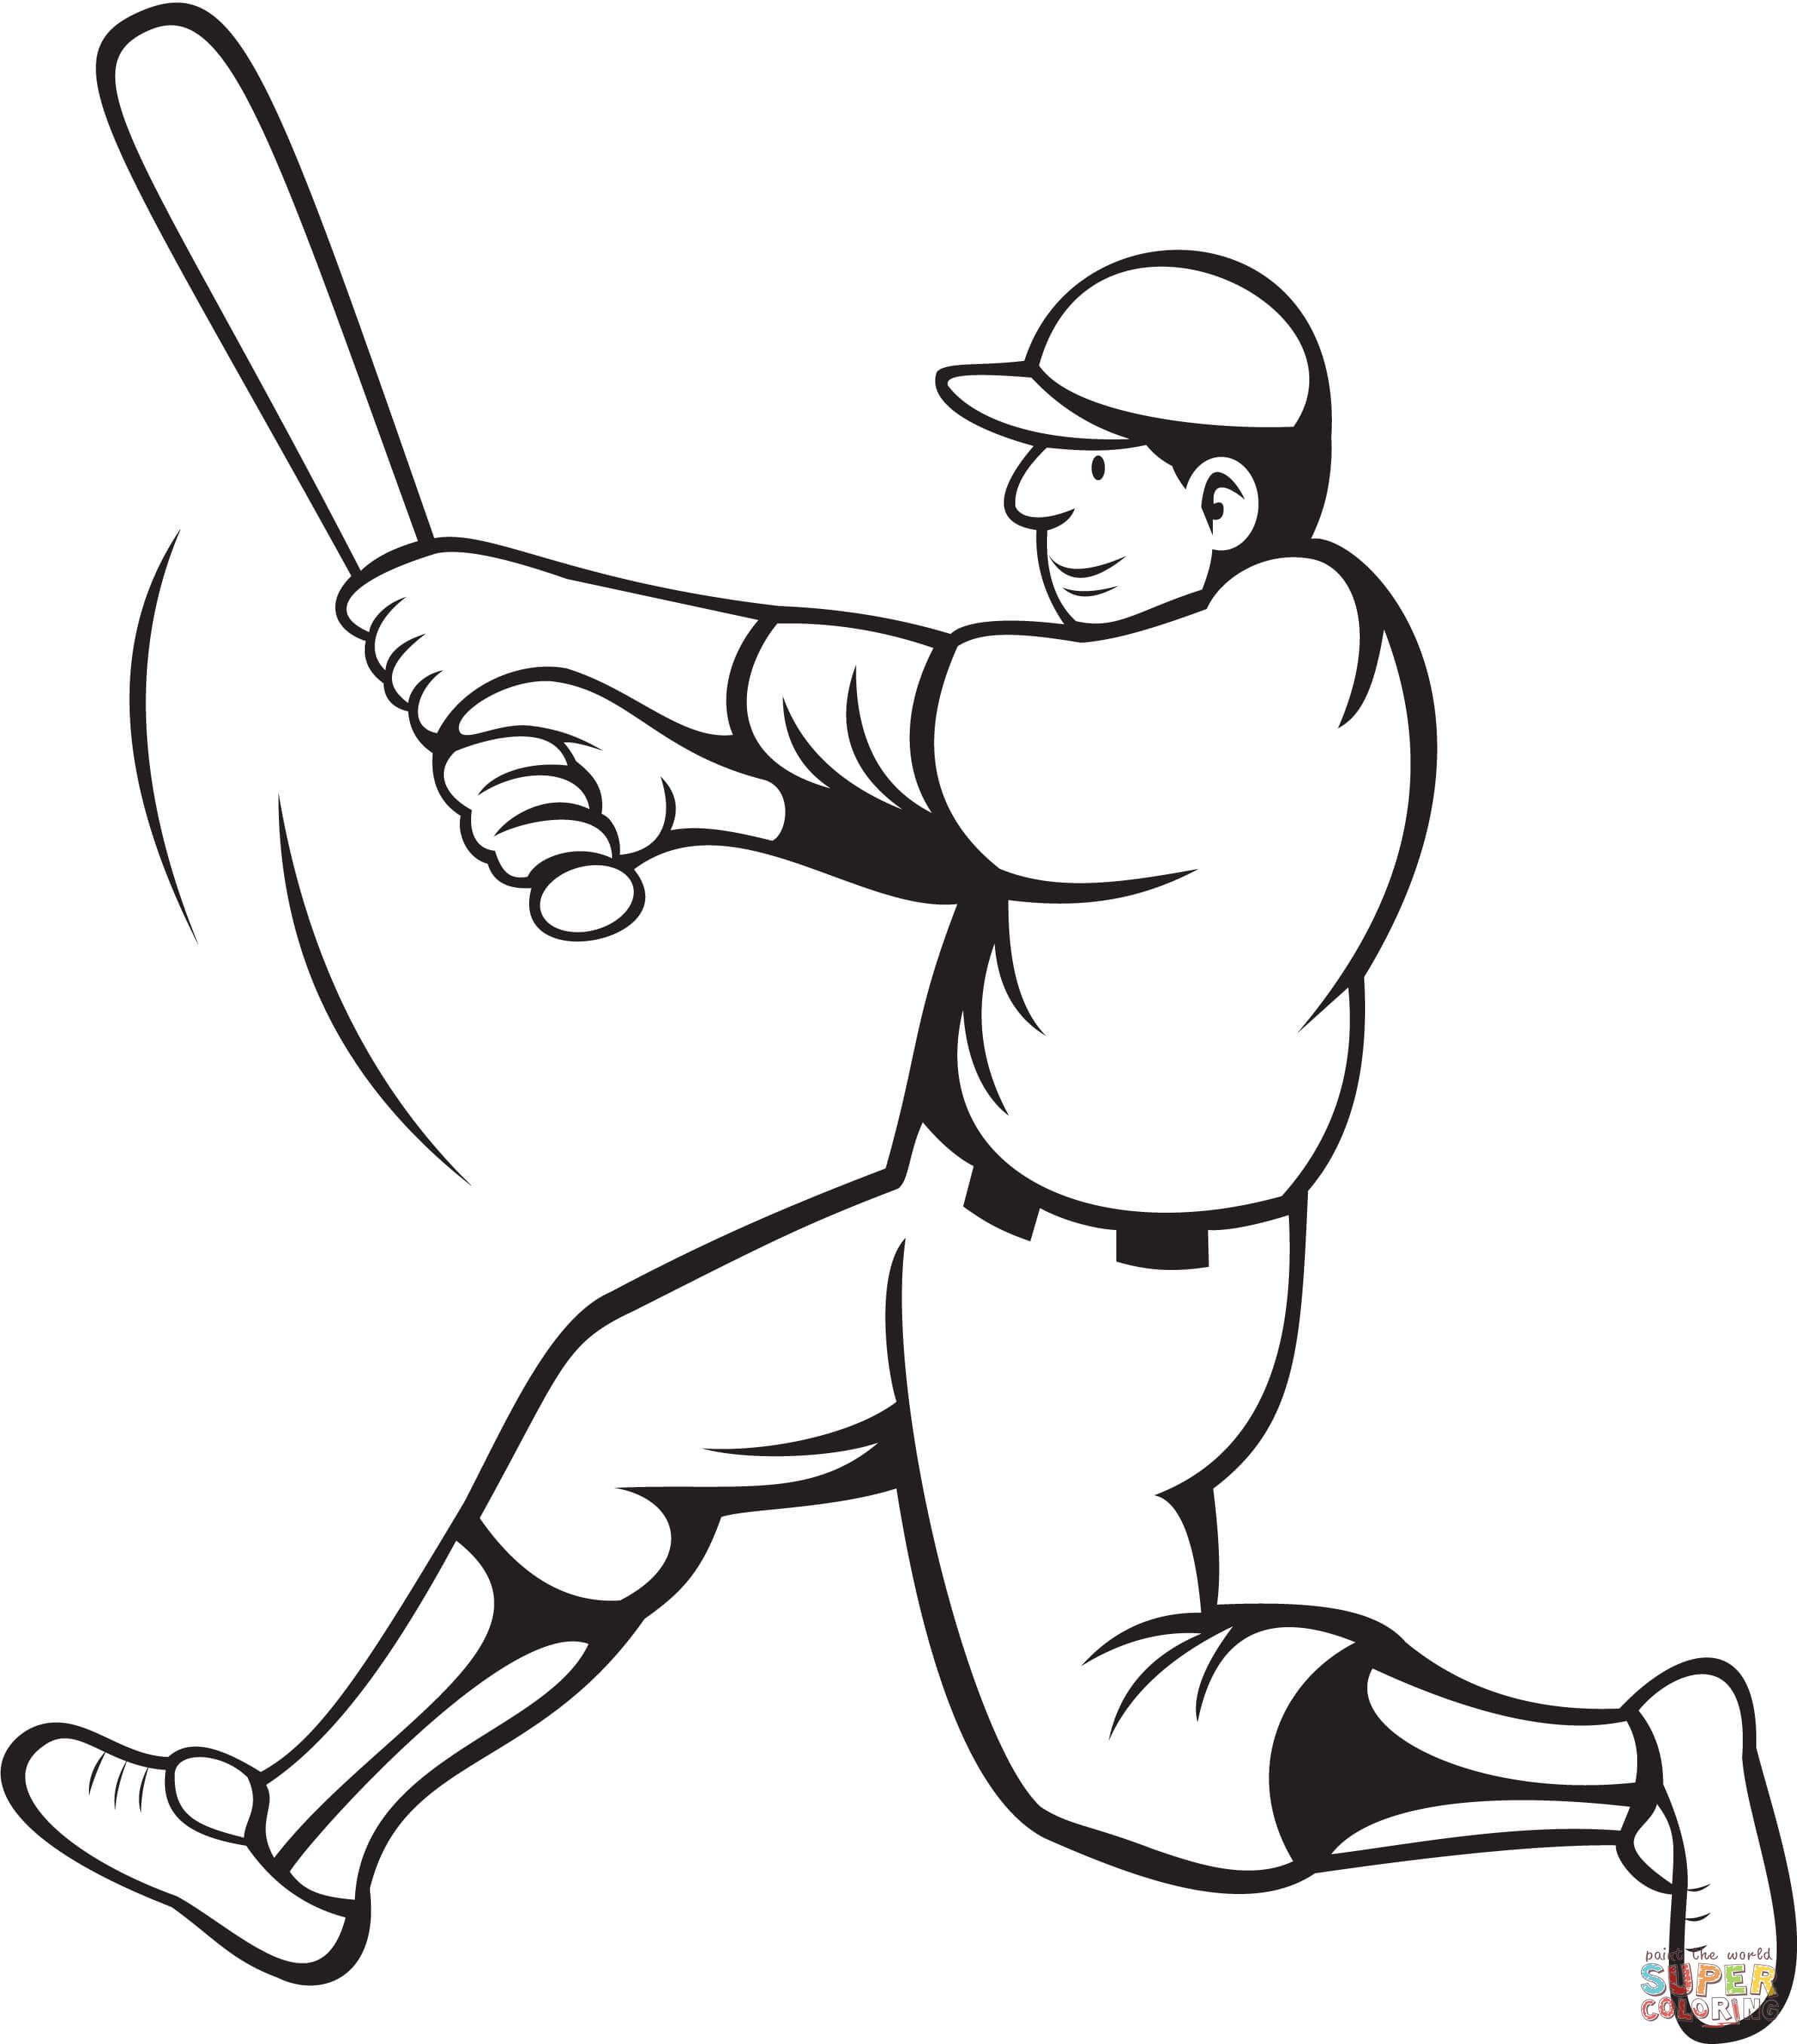 Baseball Player coloring page | Free Printable Coloring Pages